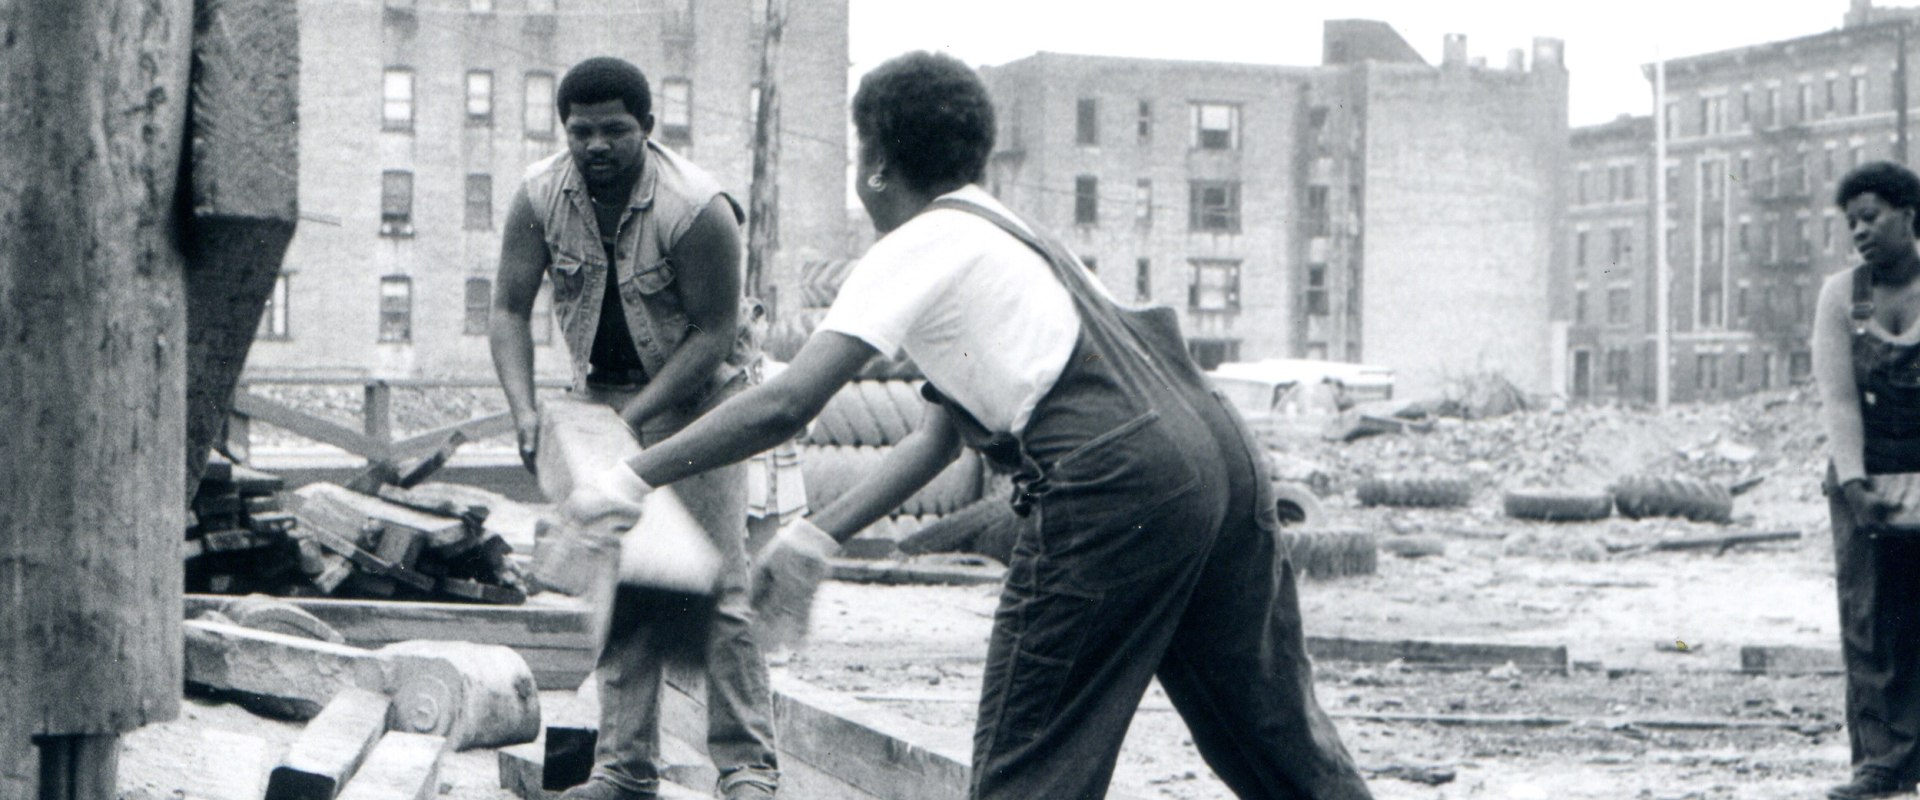 Advocacy and Activism Through Documentaries About the Bronx, New York